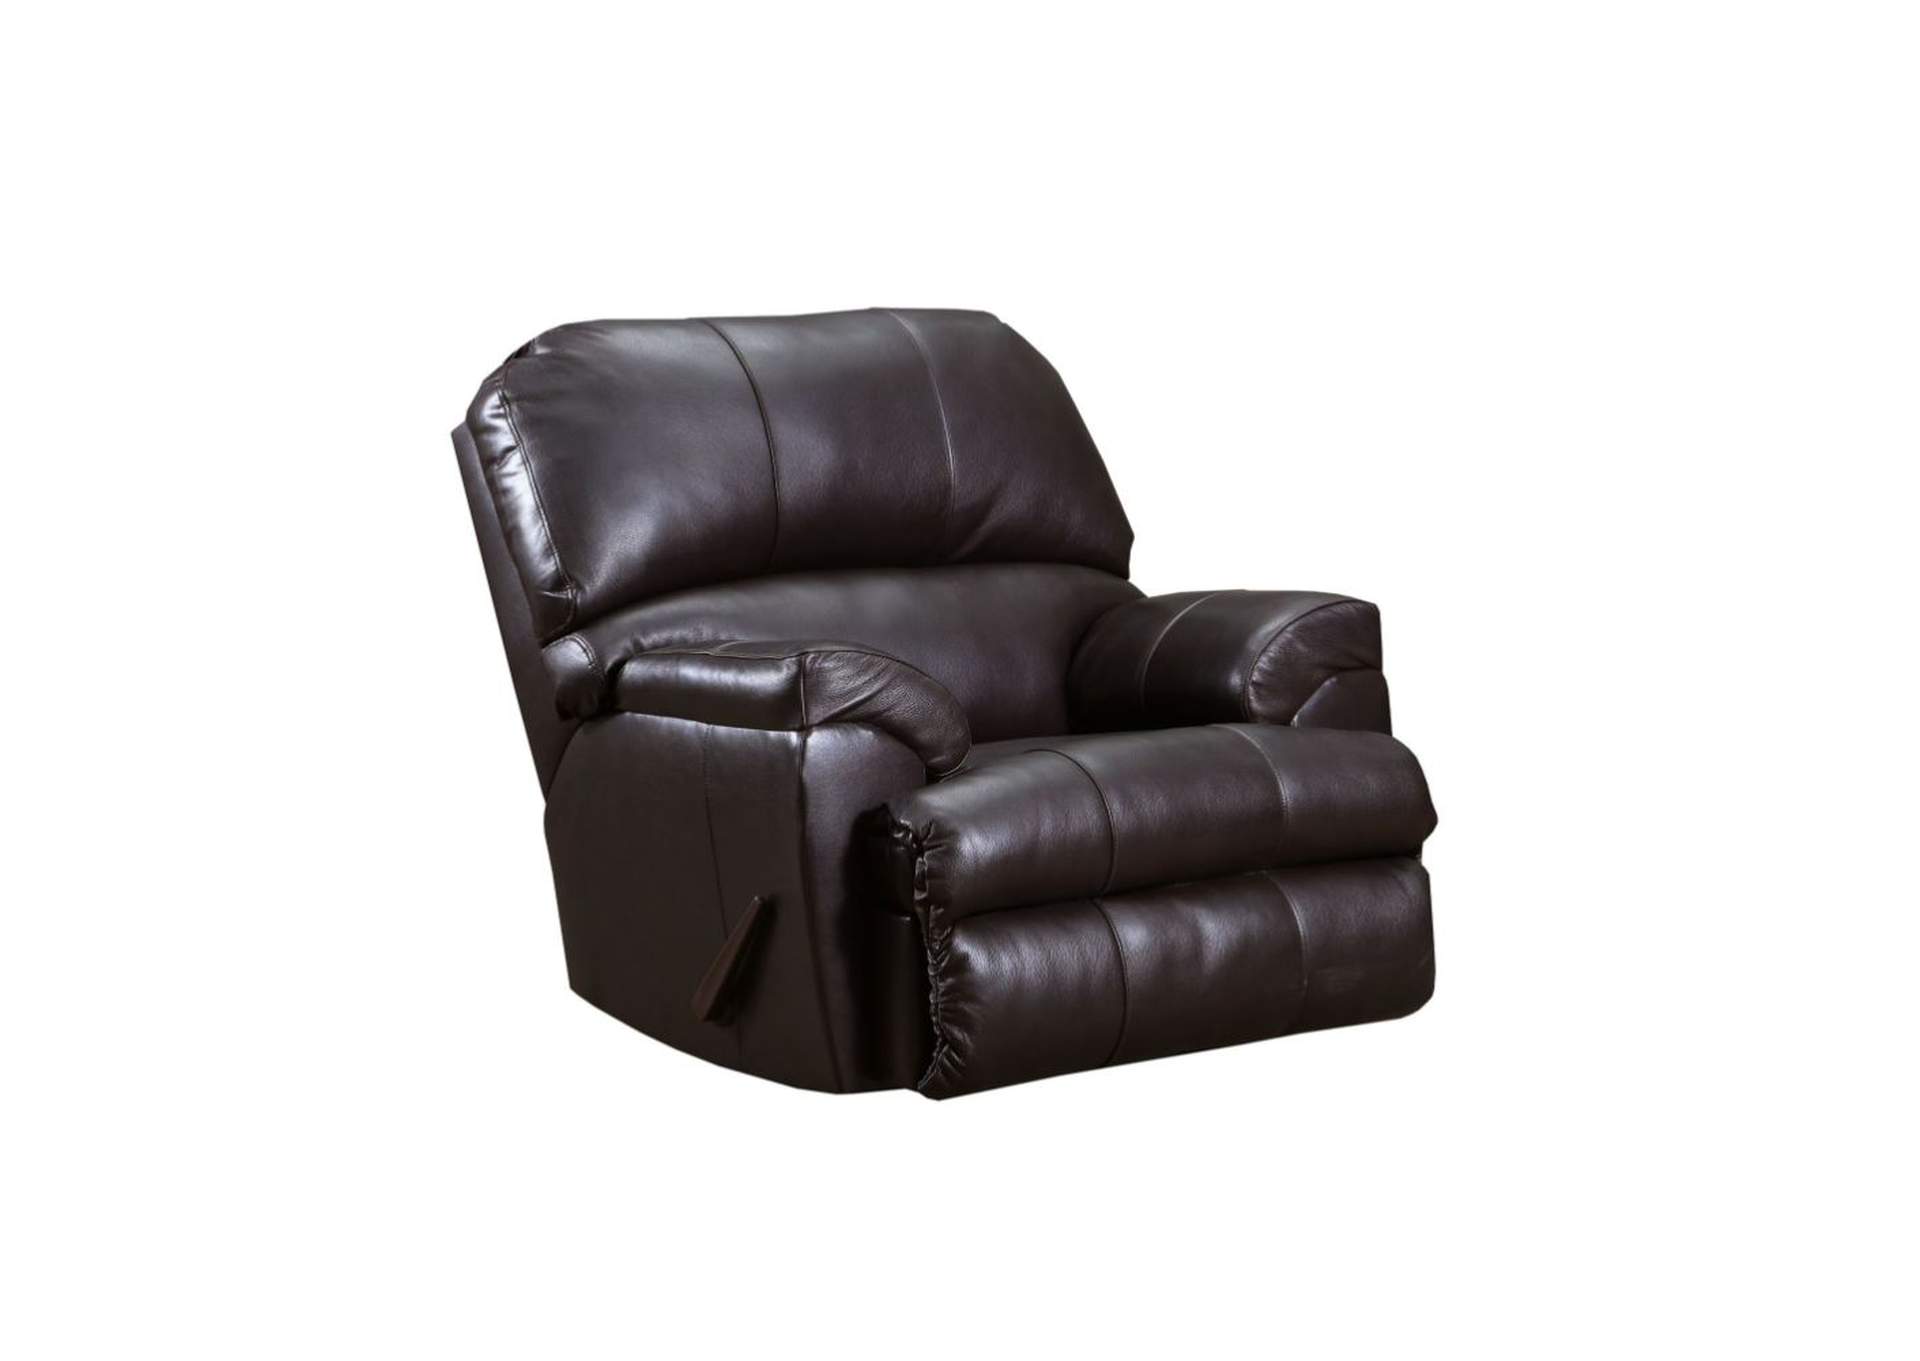 Phygia Recliner,Acme